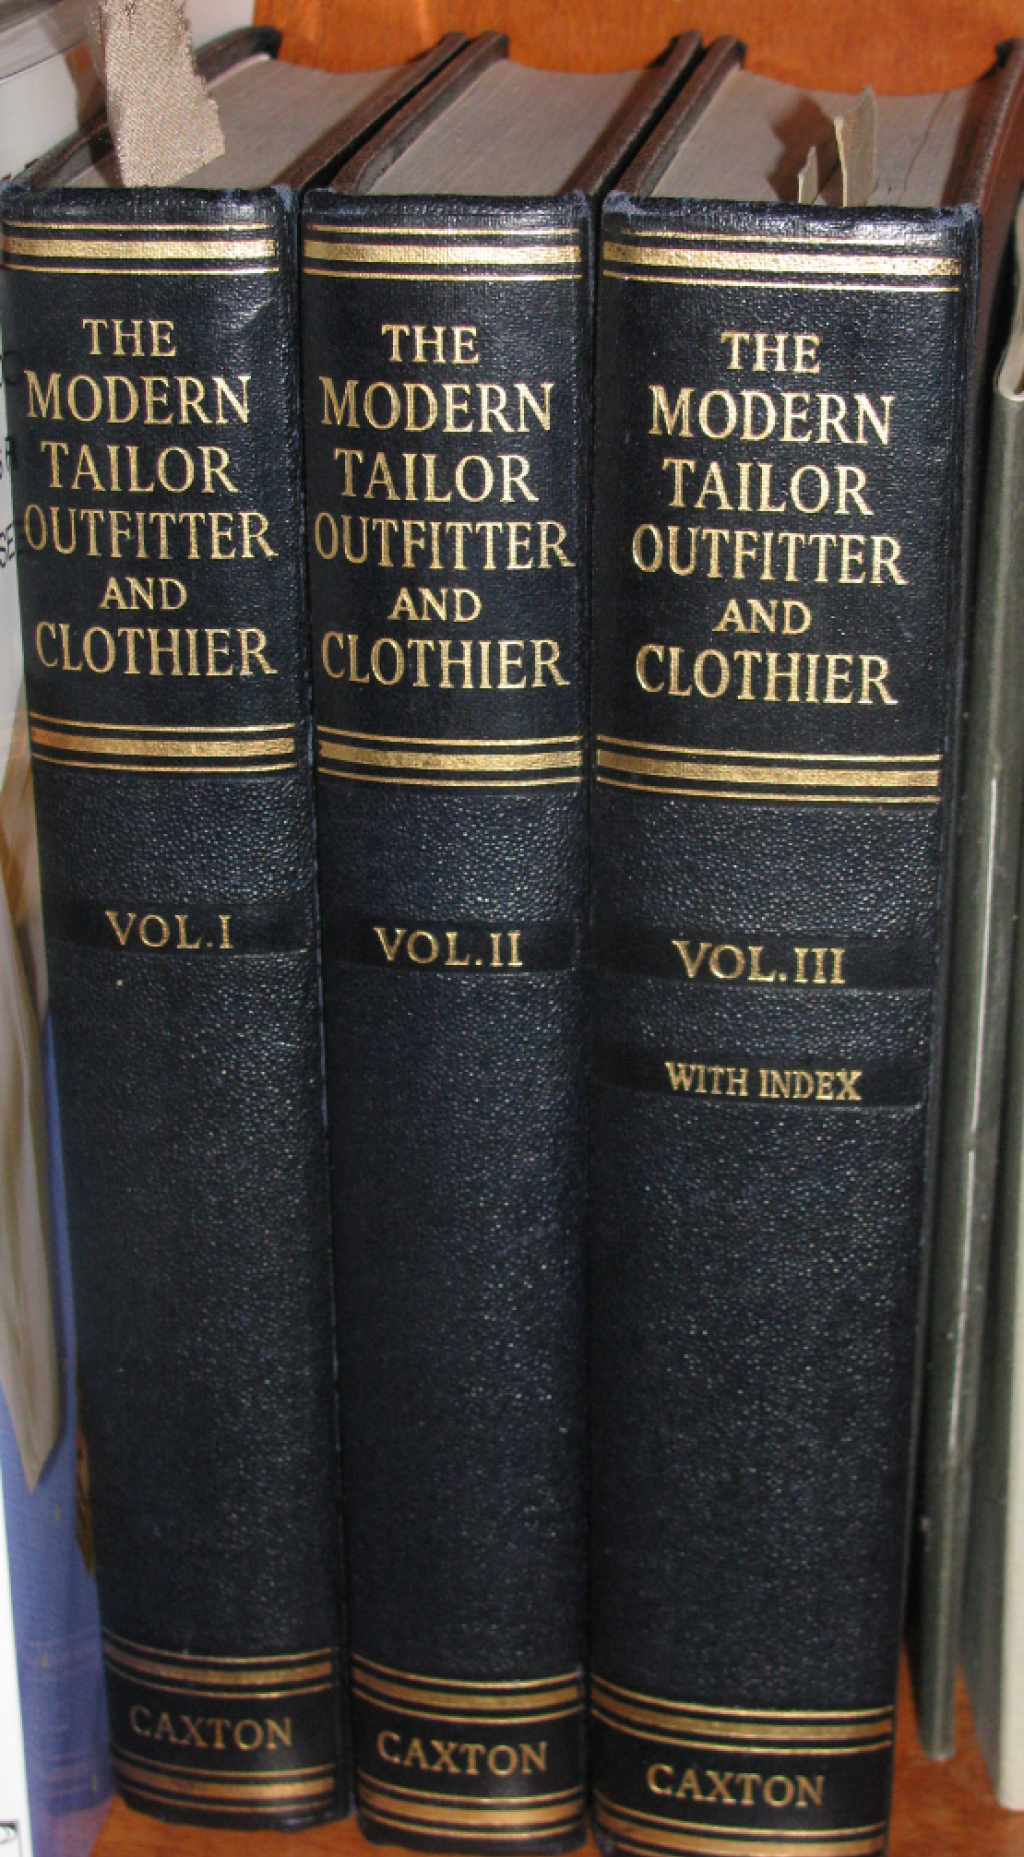 The Modern Tailor, Outfitter, and Clothier.